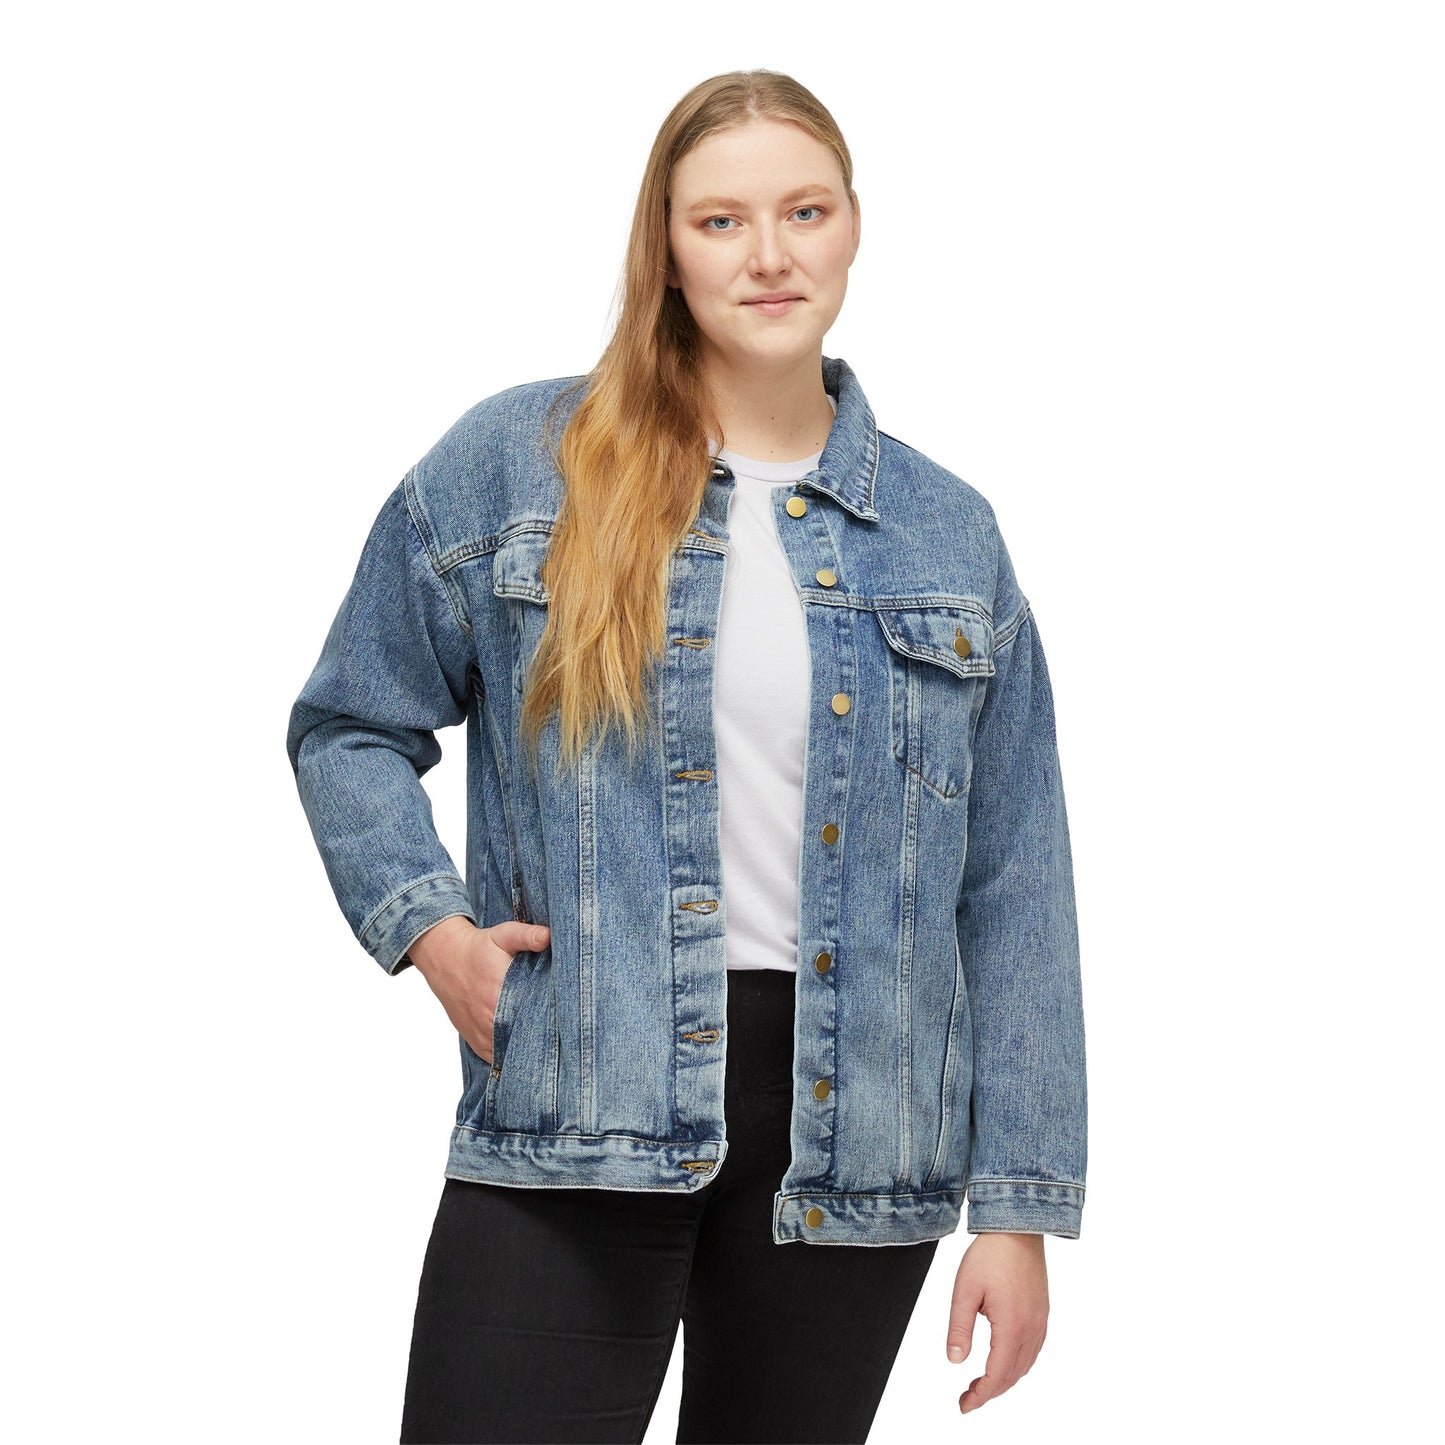 Woman modeling the front of the jacket